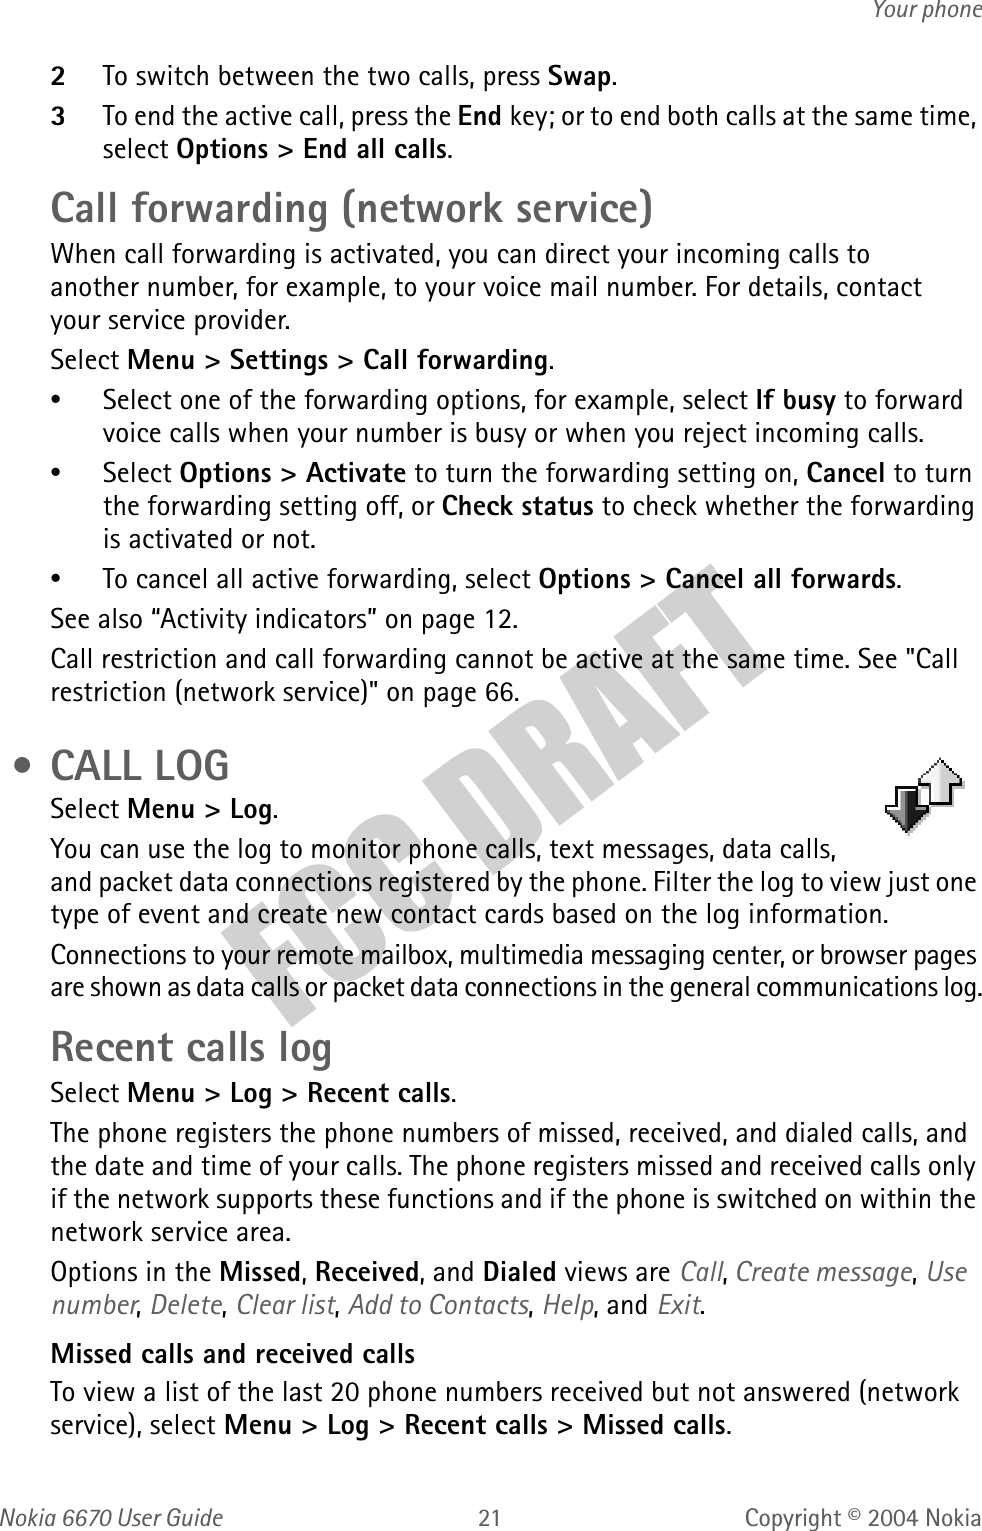 Nokia  User GuideCopyright © 2004 NokiaYour phone2To switch between the two calls, press Swap.3To end the active call, press the End key; or to end both calls at the same time, select Options &gt; End all calls.Call forwarding (network service)When call forwarding is activated, you can direct your incoming calls to another number, for example, to your voice mail number. For details, contact your service provider.Select Menu &gt; Settings &gt; Call forwarding.•Select one of the forwarding options, for example, select If busy to forward voice calls when your number is busy or when you reject incoming calls.•Select Options &gt; Activate to turn the forwarding setting on, Cancel to turn the forwarding setting off, or Check status to check whether the forwarding is activated or not.•To cancel all active forwarding, select Options &gt; Cancel all forwards.See also “Activity indicators” on page 12.Call restriction and call forwarding cannot be active at the same time. See &quot;Call restriction (network service)&quot; on page 66.  • CALL LOGSelect Menu &gt; Log. You can use the log to monitor phone calls, text messages, data calls, and packet data connections registered by the phone. Filter the log to view just one type of event and create new contact cards based on the log information.Connections to your remote mailbox, multimedia messaging center, or browser pages are shown as data calls or packet data connections in the general communications log.Recent calls logSelect Menu &gt; Log &gt; Recent calls.The phone registers the phone numbers of missed, received, and dialed calls, and the date and time of your calls. The phone registers missed and received calls only if the network supports these functions and if the phone is switched on within the network service area.Options in the Missed, Received, and Dialed views are Call, Create message, Use number, Delete, Clear list, Add to Contacts, Help, and Exit.Missed calls and received callsTo view a list of the last 20 phone numbers received but not answered (network service), select Menu &gt; Log &gt; Recent calls &gt; Missed calls.